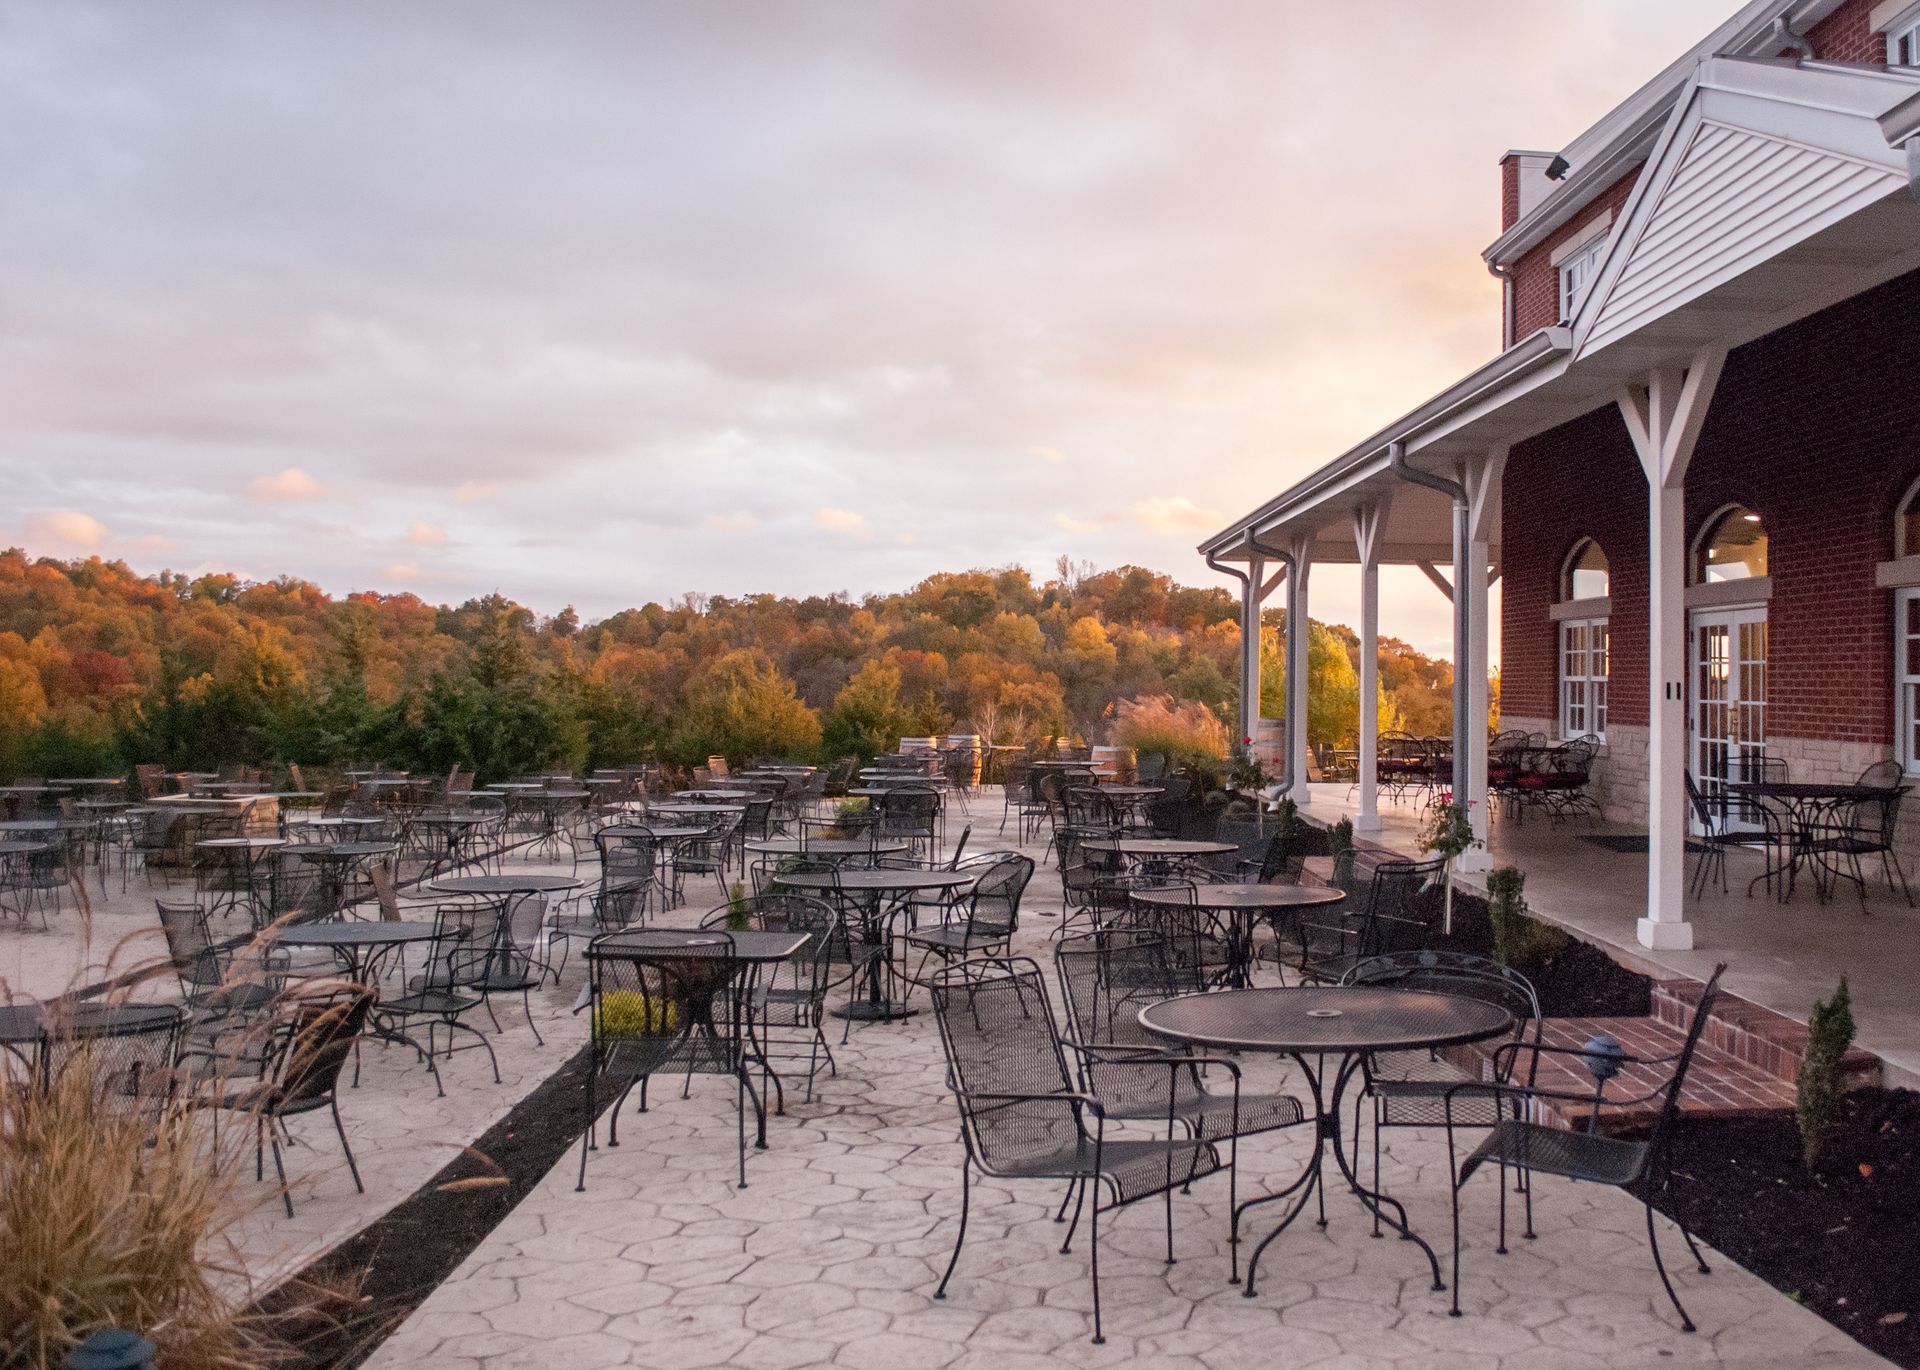 Host a Small Private Event on the Vineyard Patio at Canterbury Hill Winery & Restaurant. Book Today.